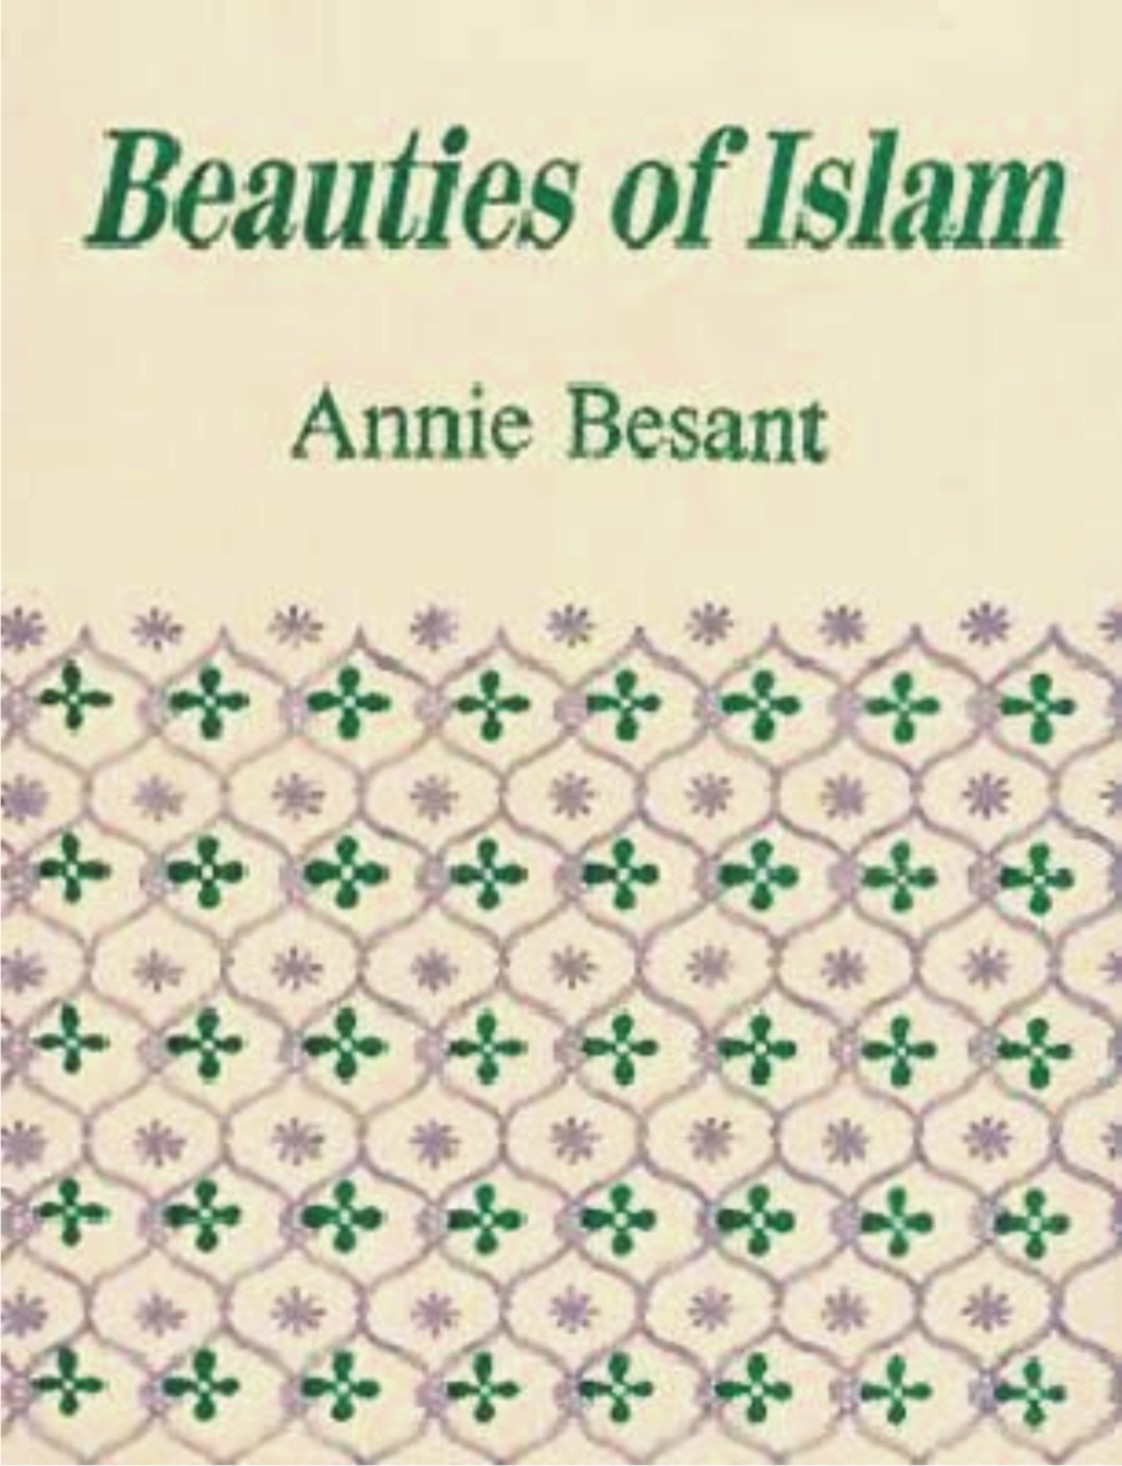 Revisiting Annie Besant’s Lecture on  “Beauties of Islam”